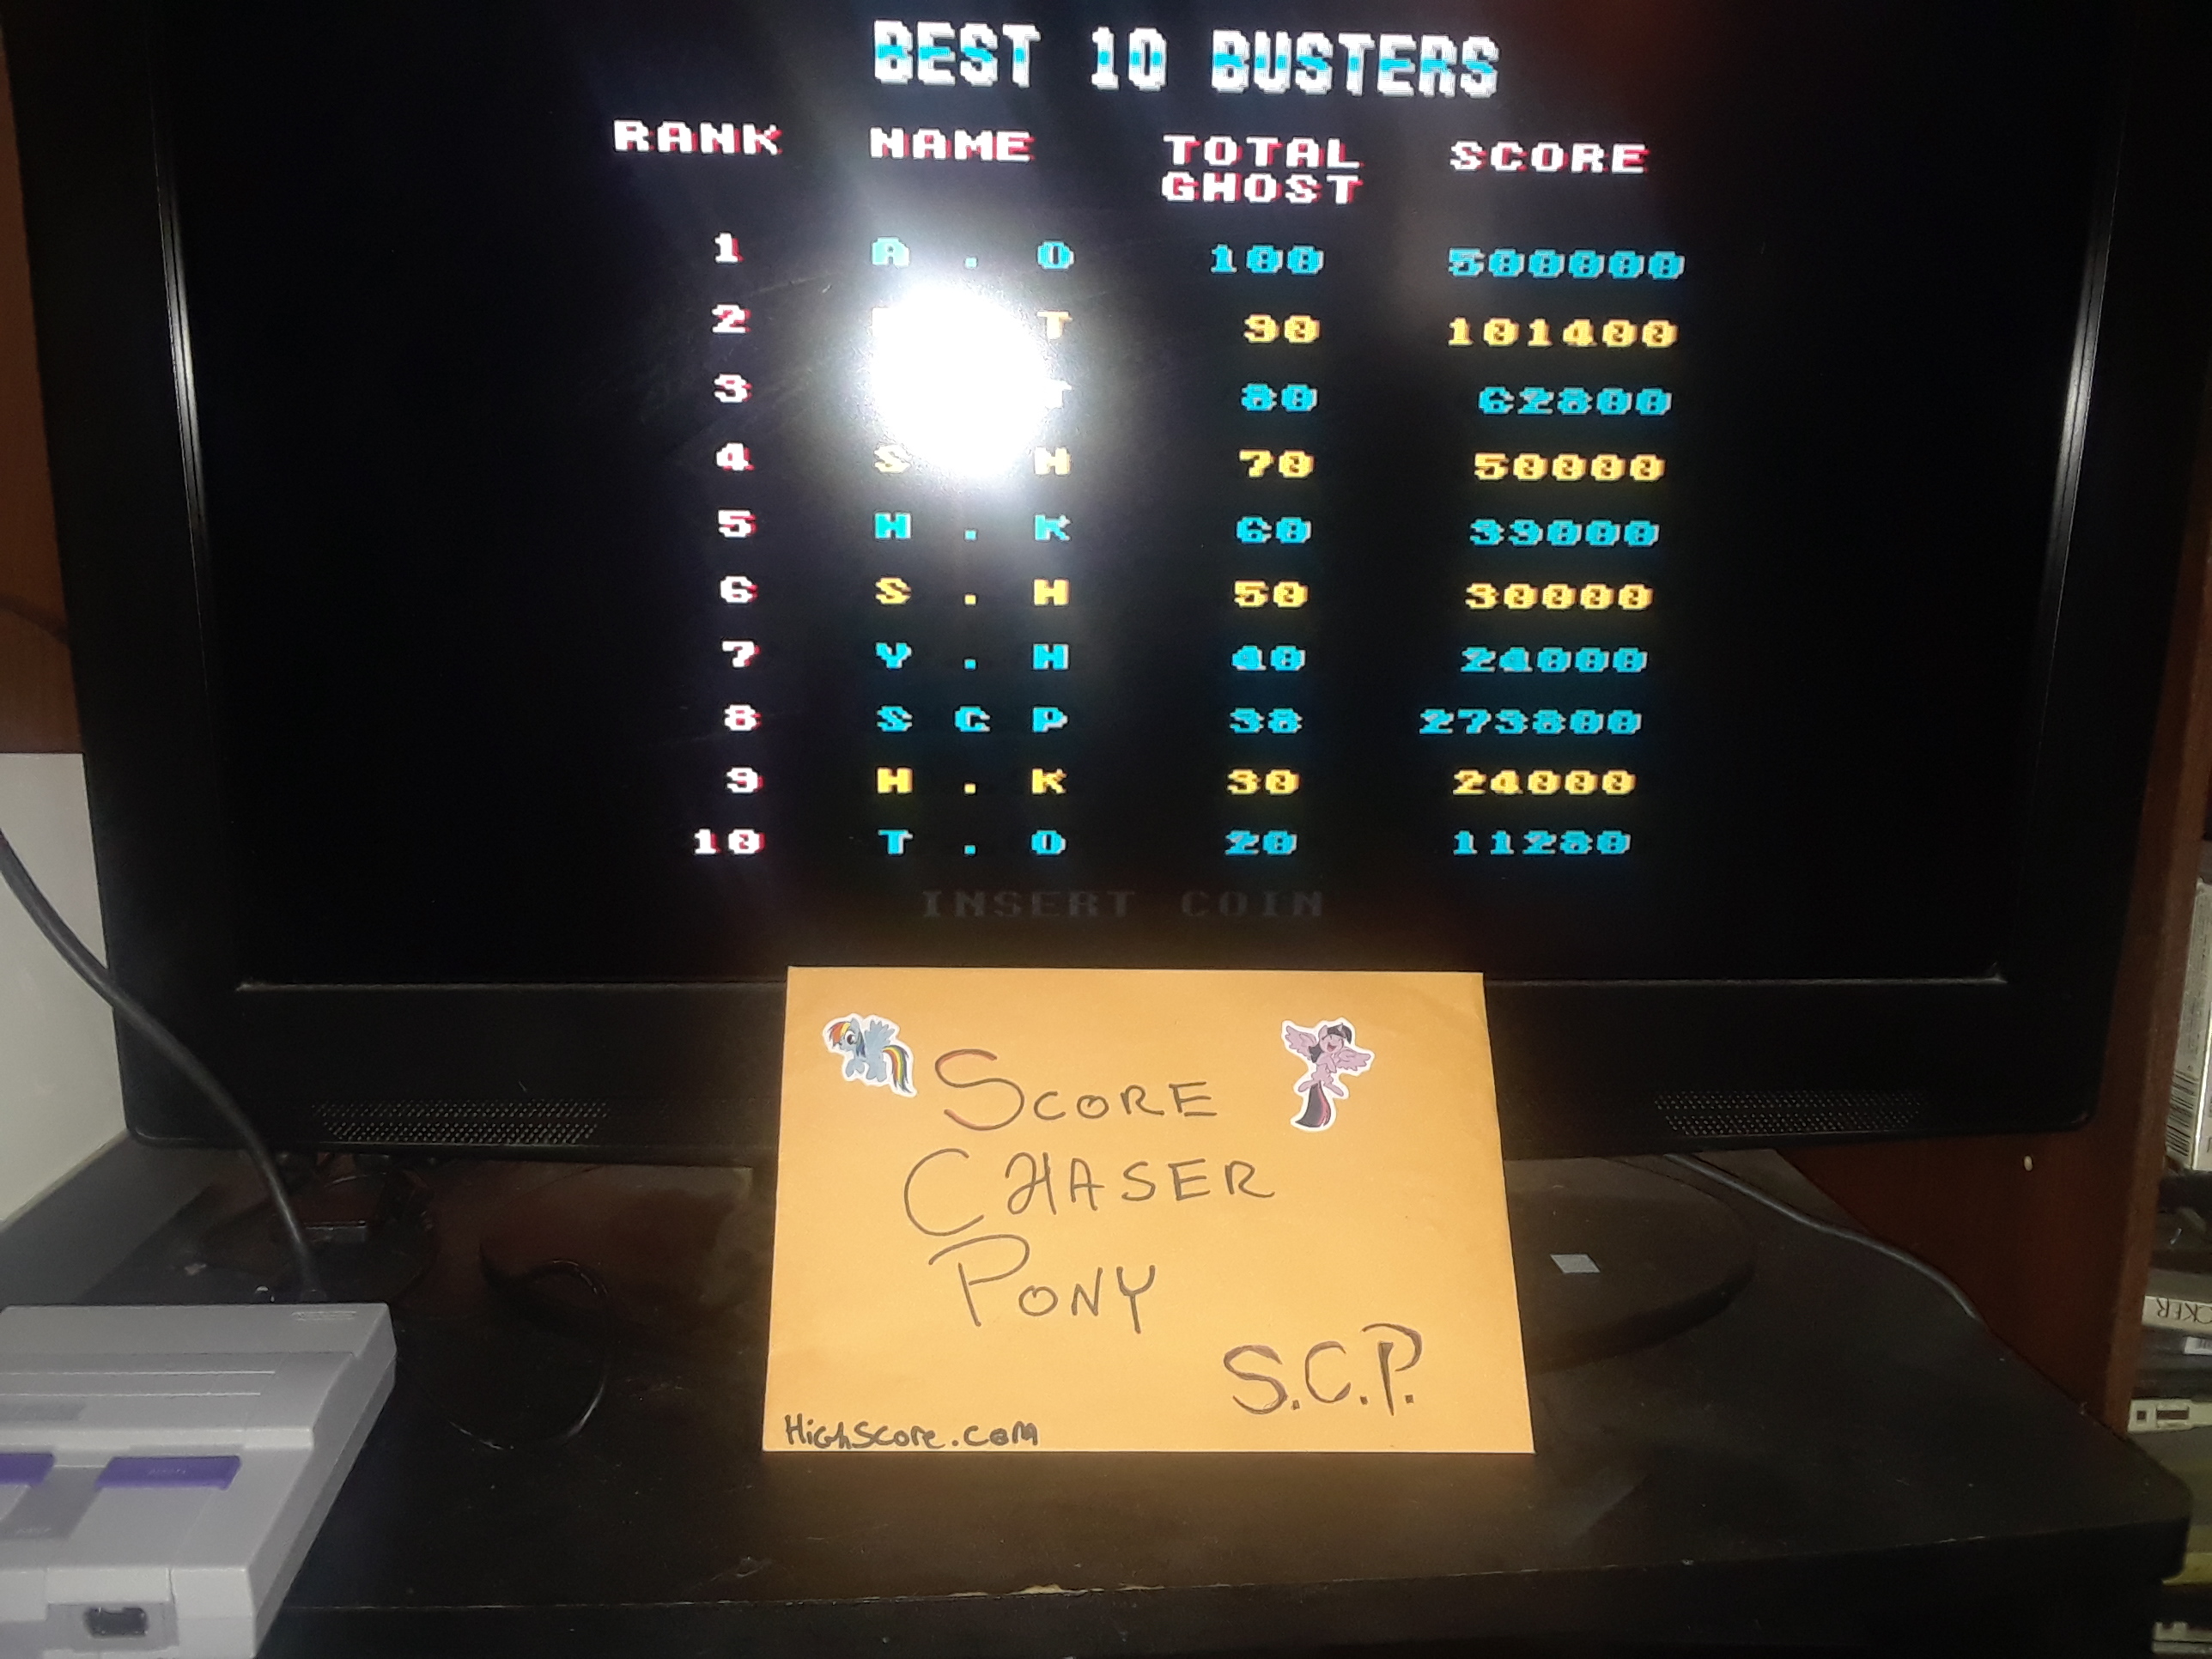 Scorechaserpony: The Real Ghostbusters [ghostb] (Arcade Emulated / M.A.M.E.) 273,800 points on 2019-04-08 12:10:47